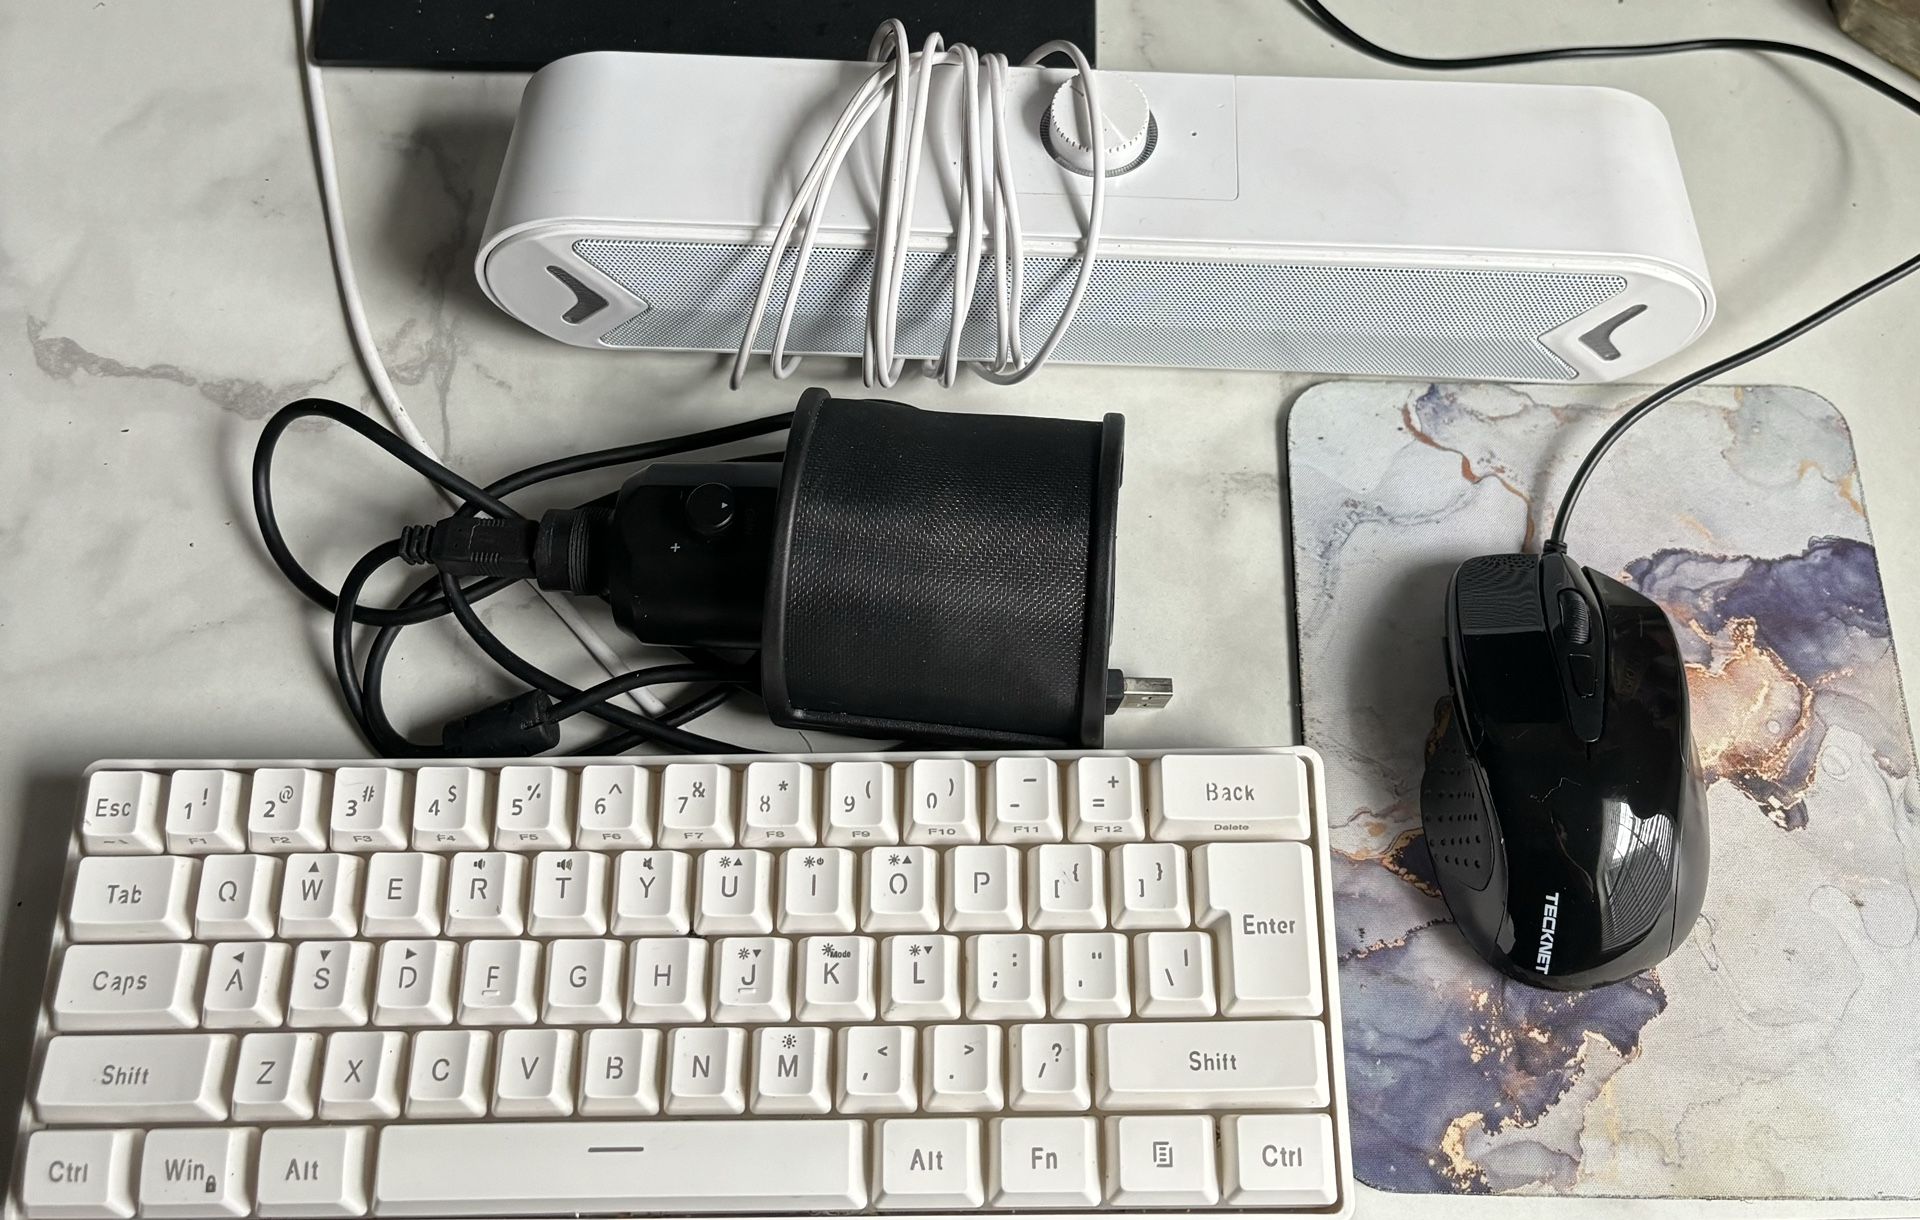 Keyboard, Mouse, Mic, and Speaker